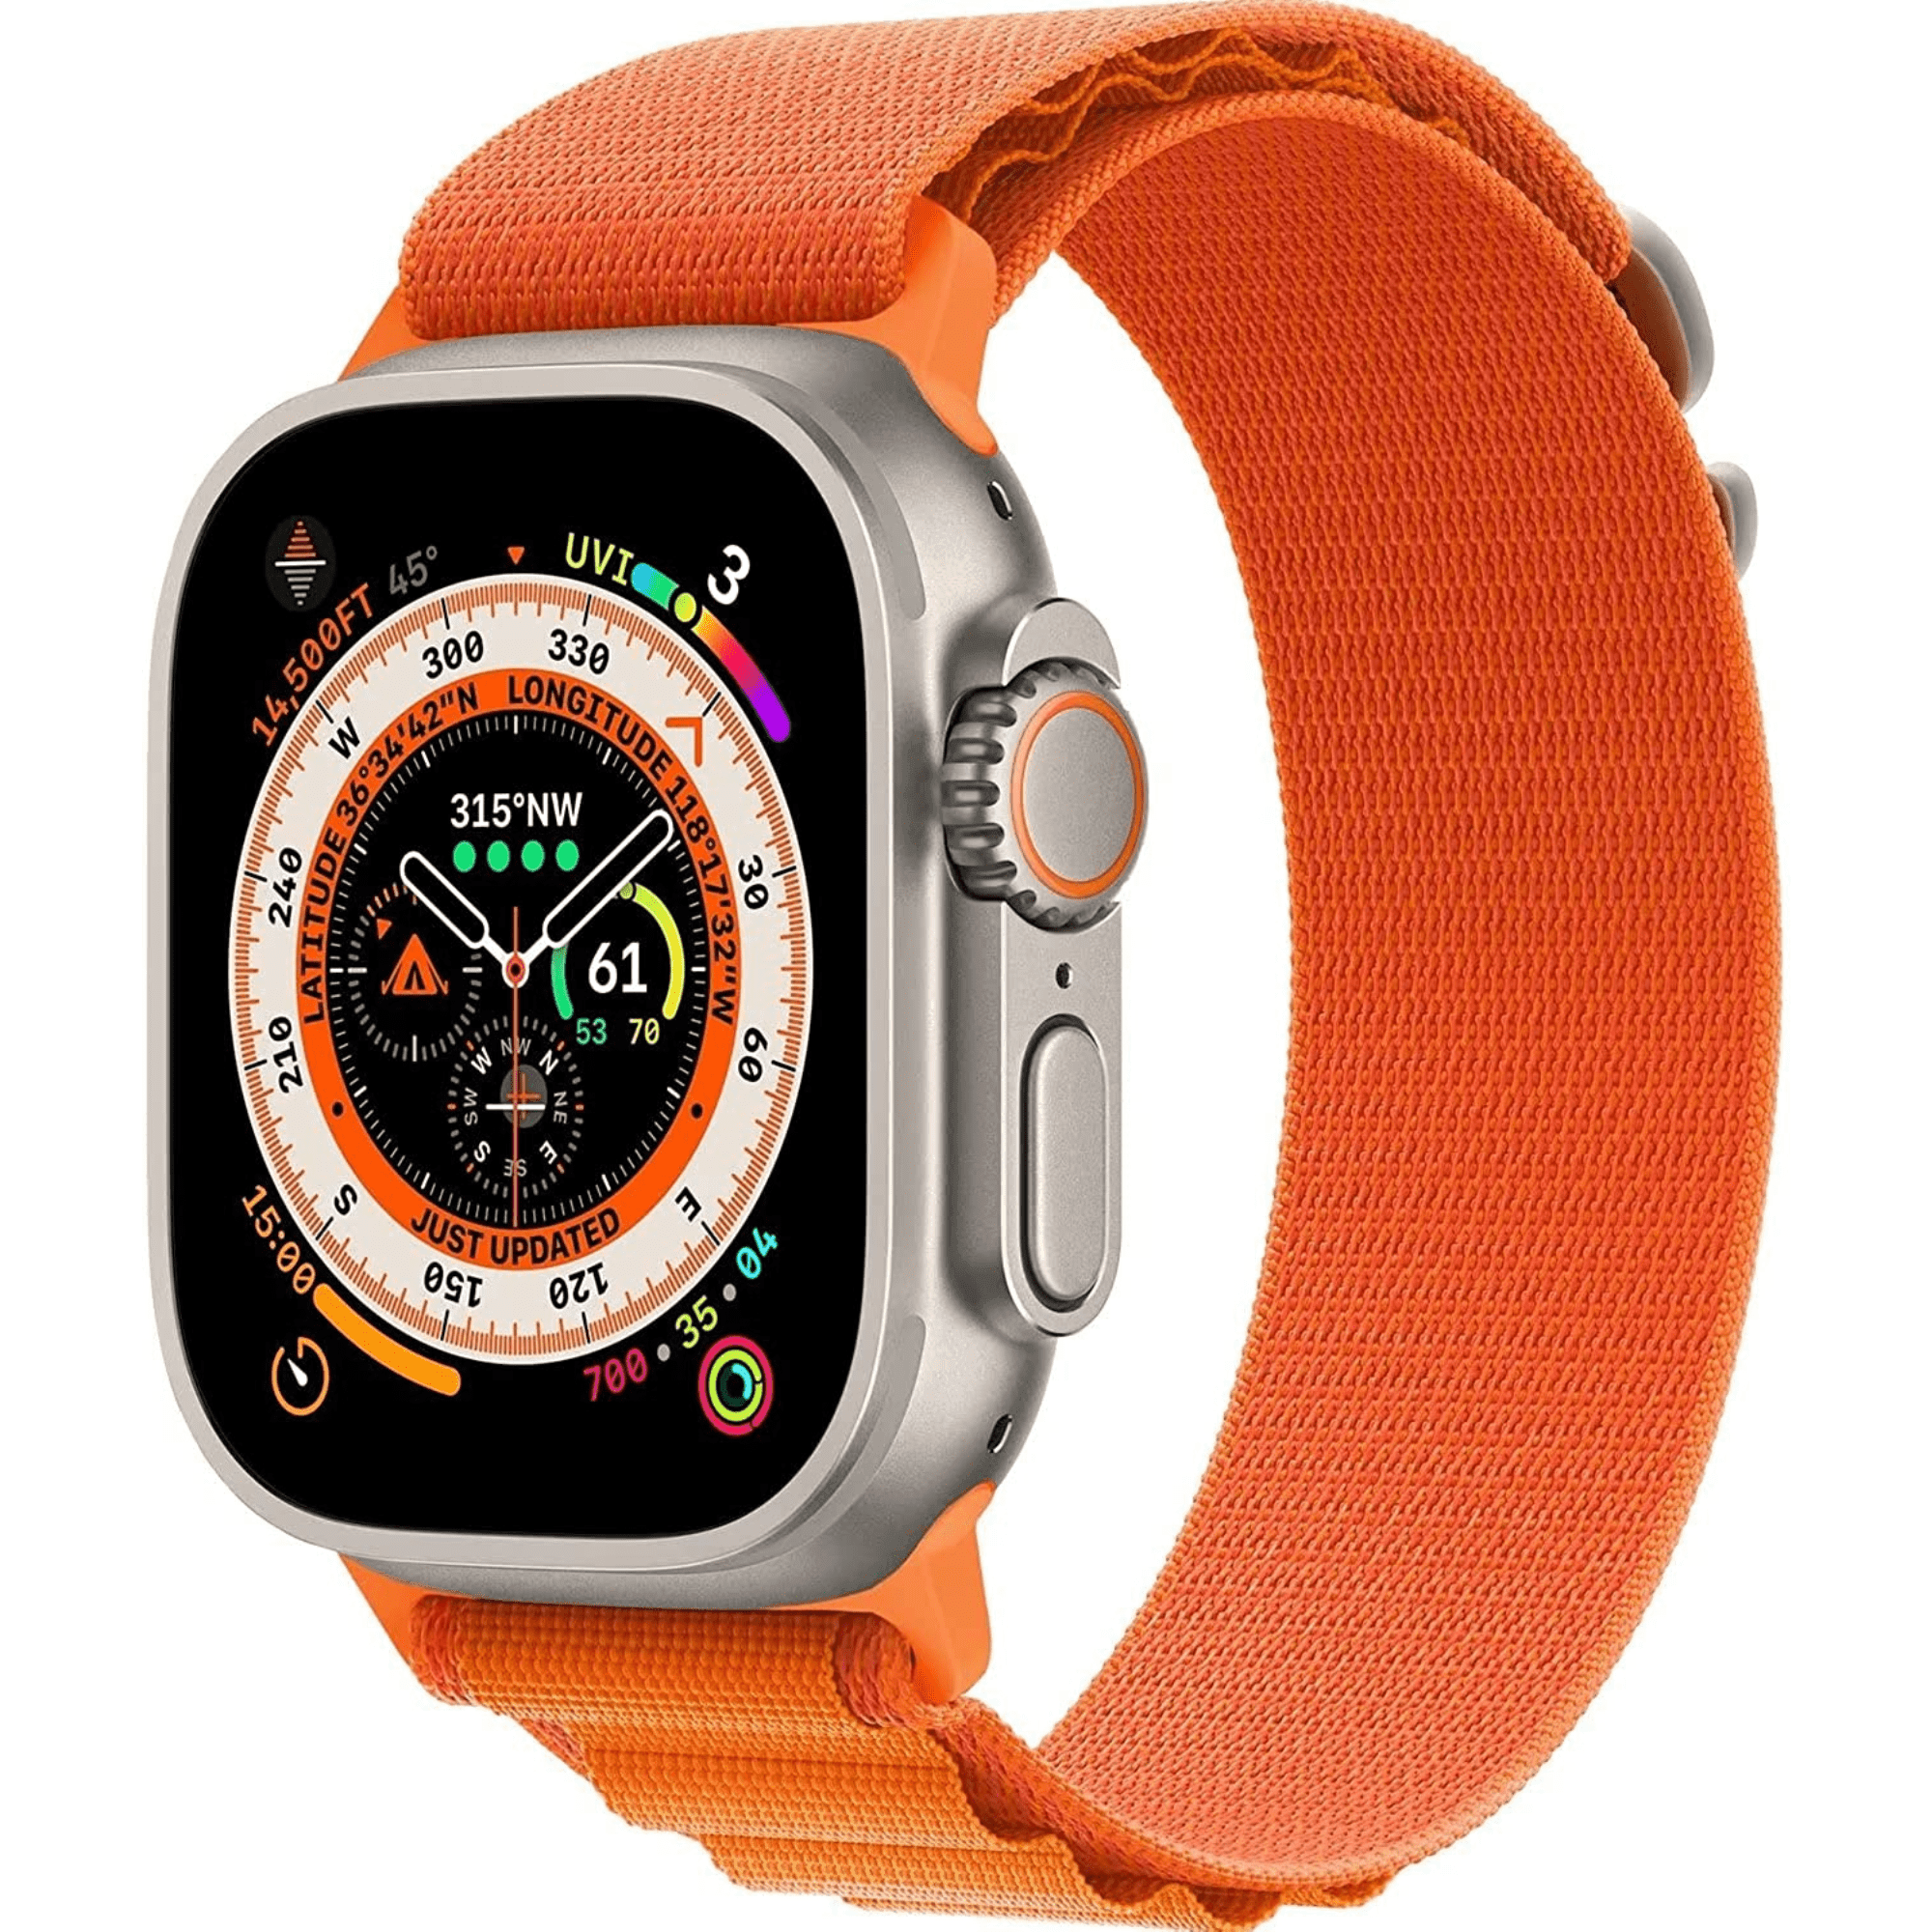 Conversion Kit for Apple Watch - Apple Watch 44 mm to Apple watch Ultra 49 mm: Titanium Style Case + Alpine Loop Band… mod kits india dream watches apple watch